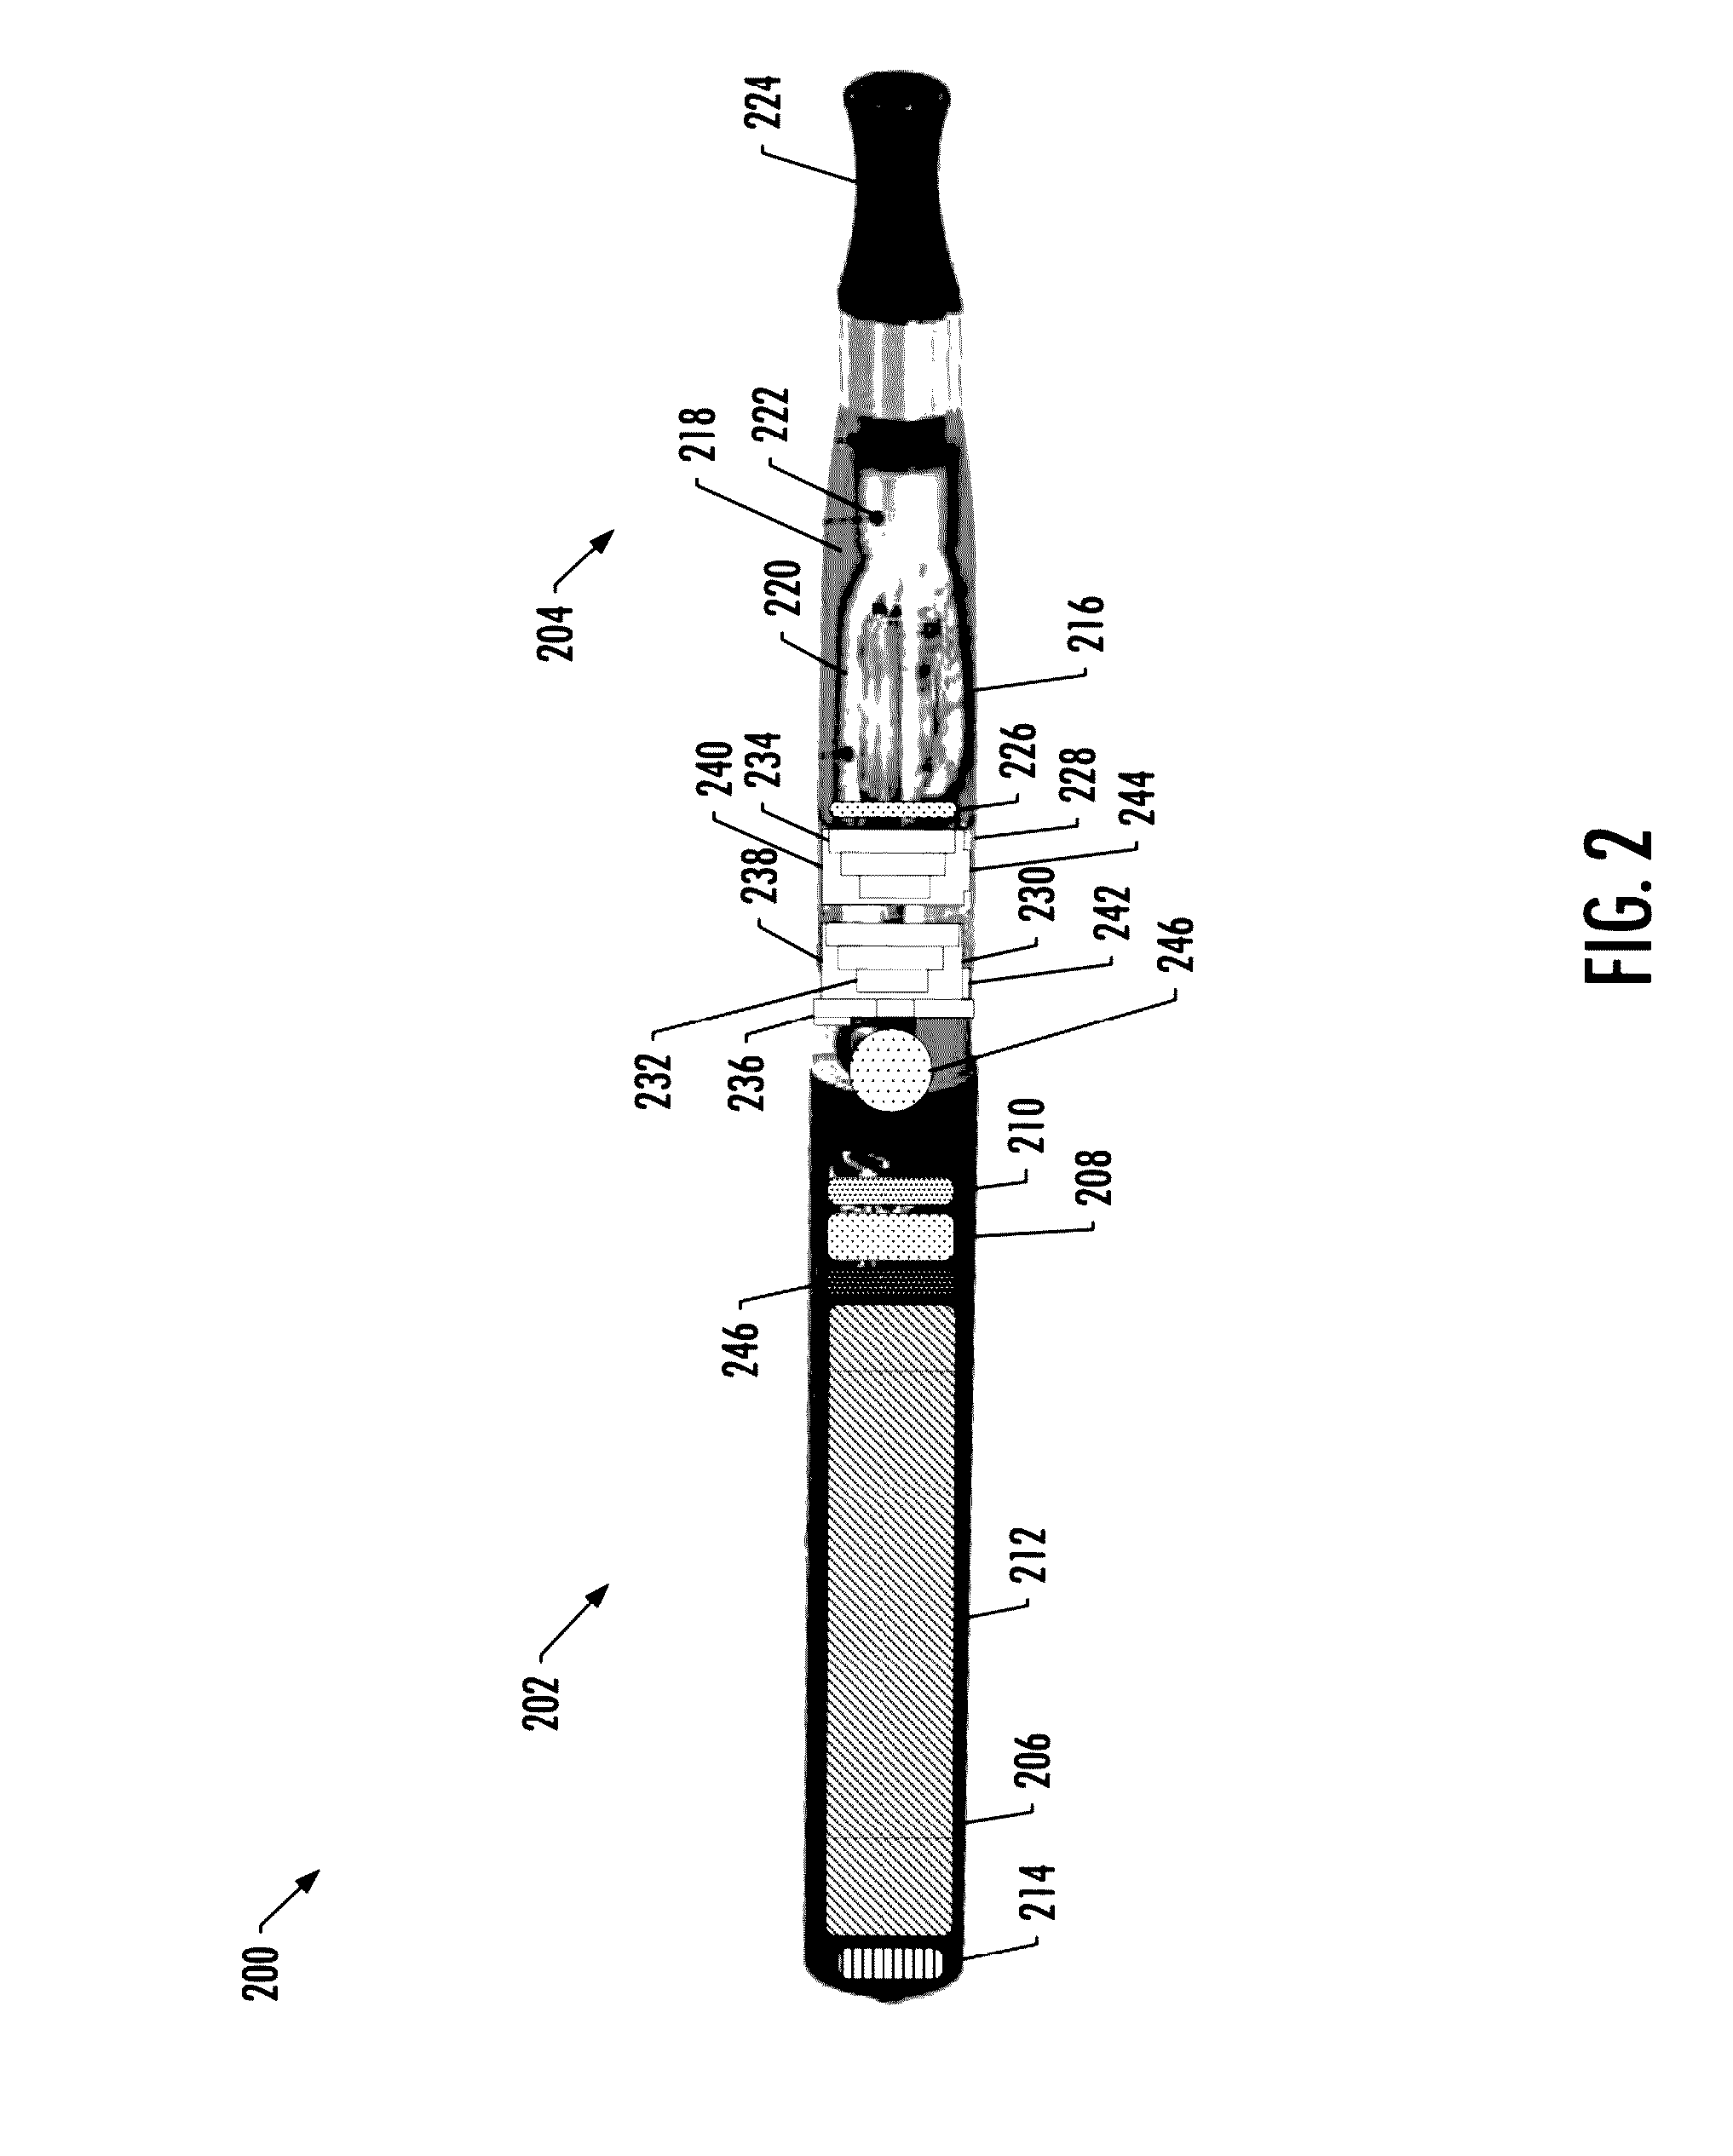 Contained liquid system for refilling aerosol delivery devices